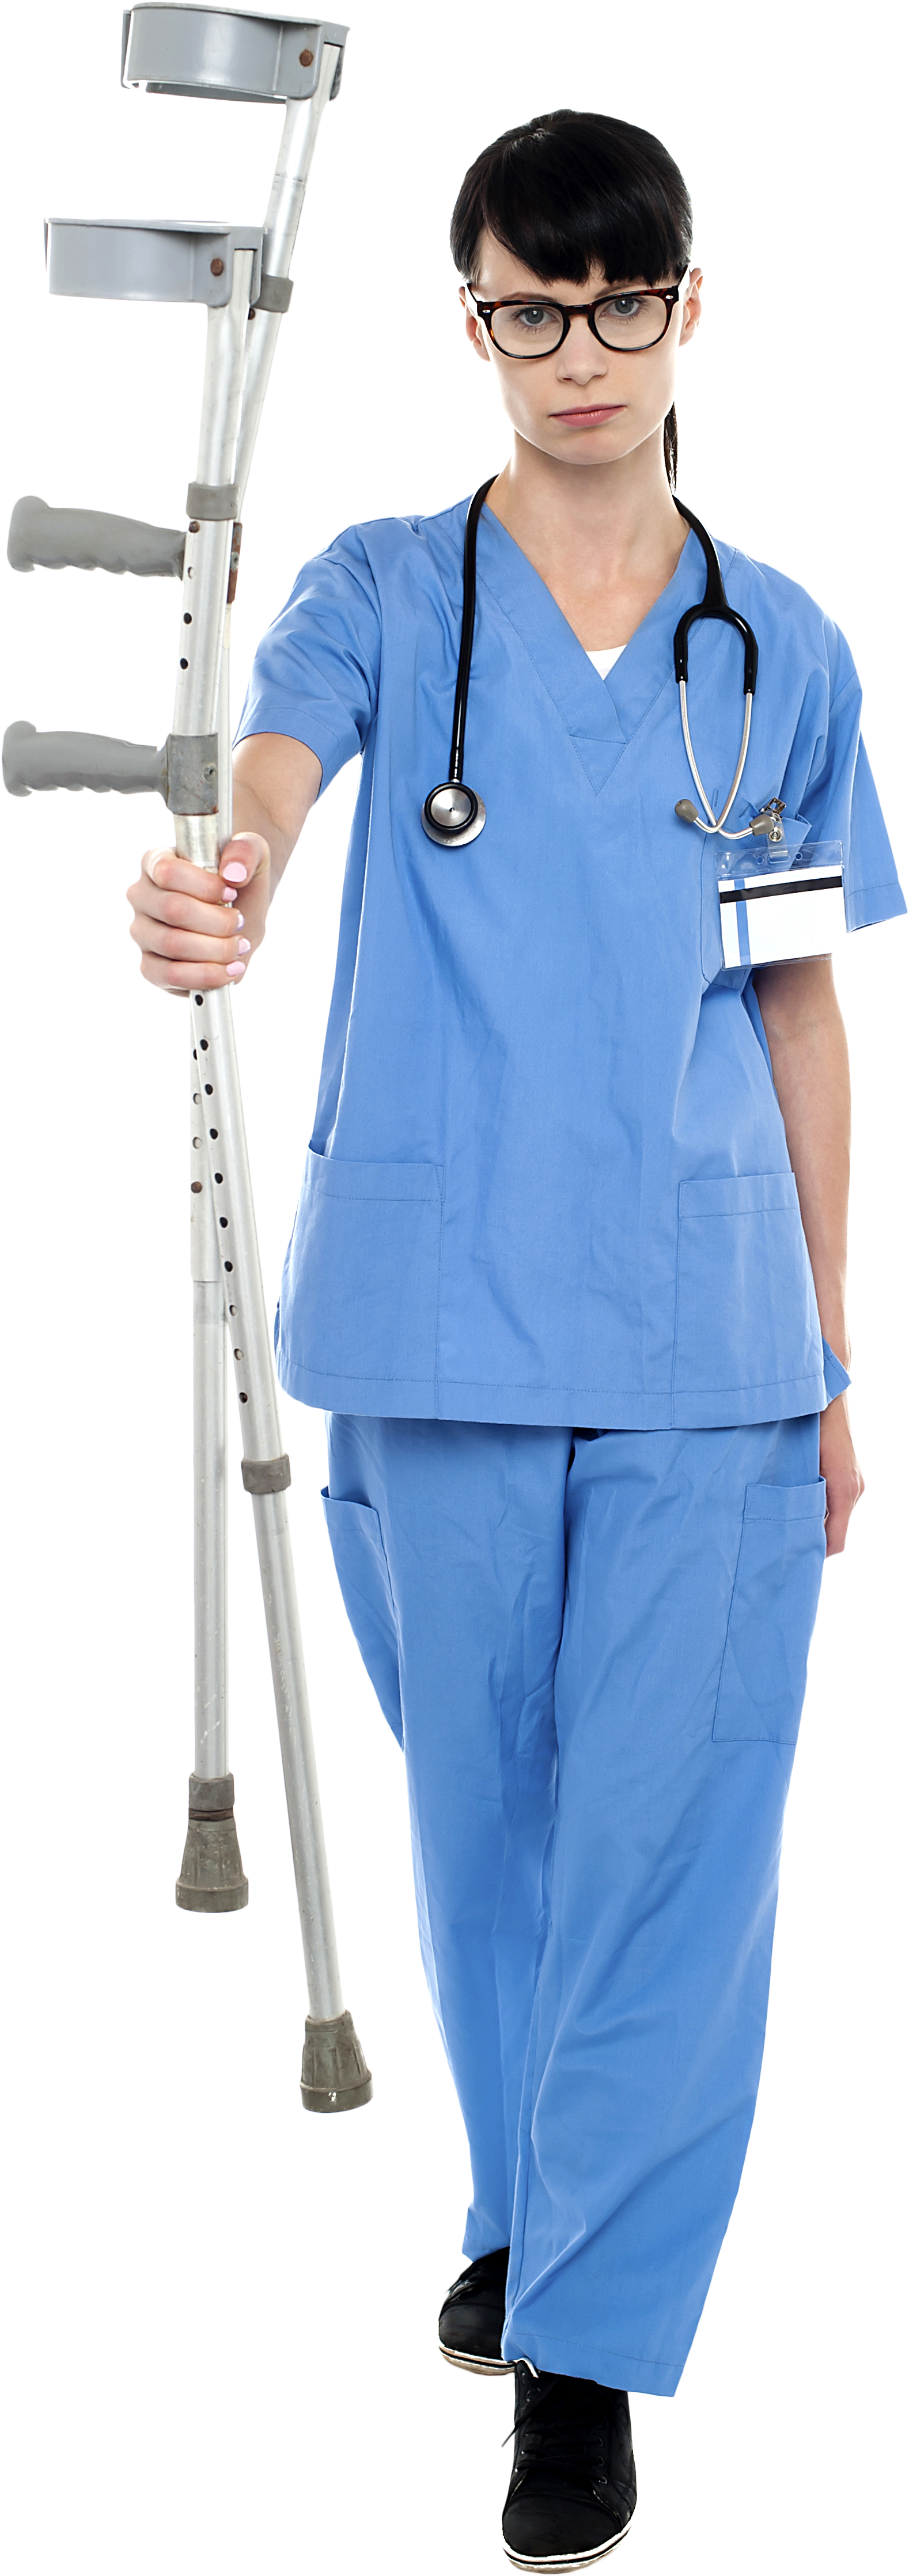 Female Doctor Png Image - Portable Network Graphics (3200x4809)